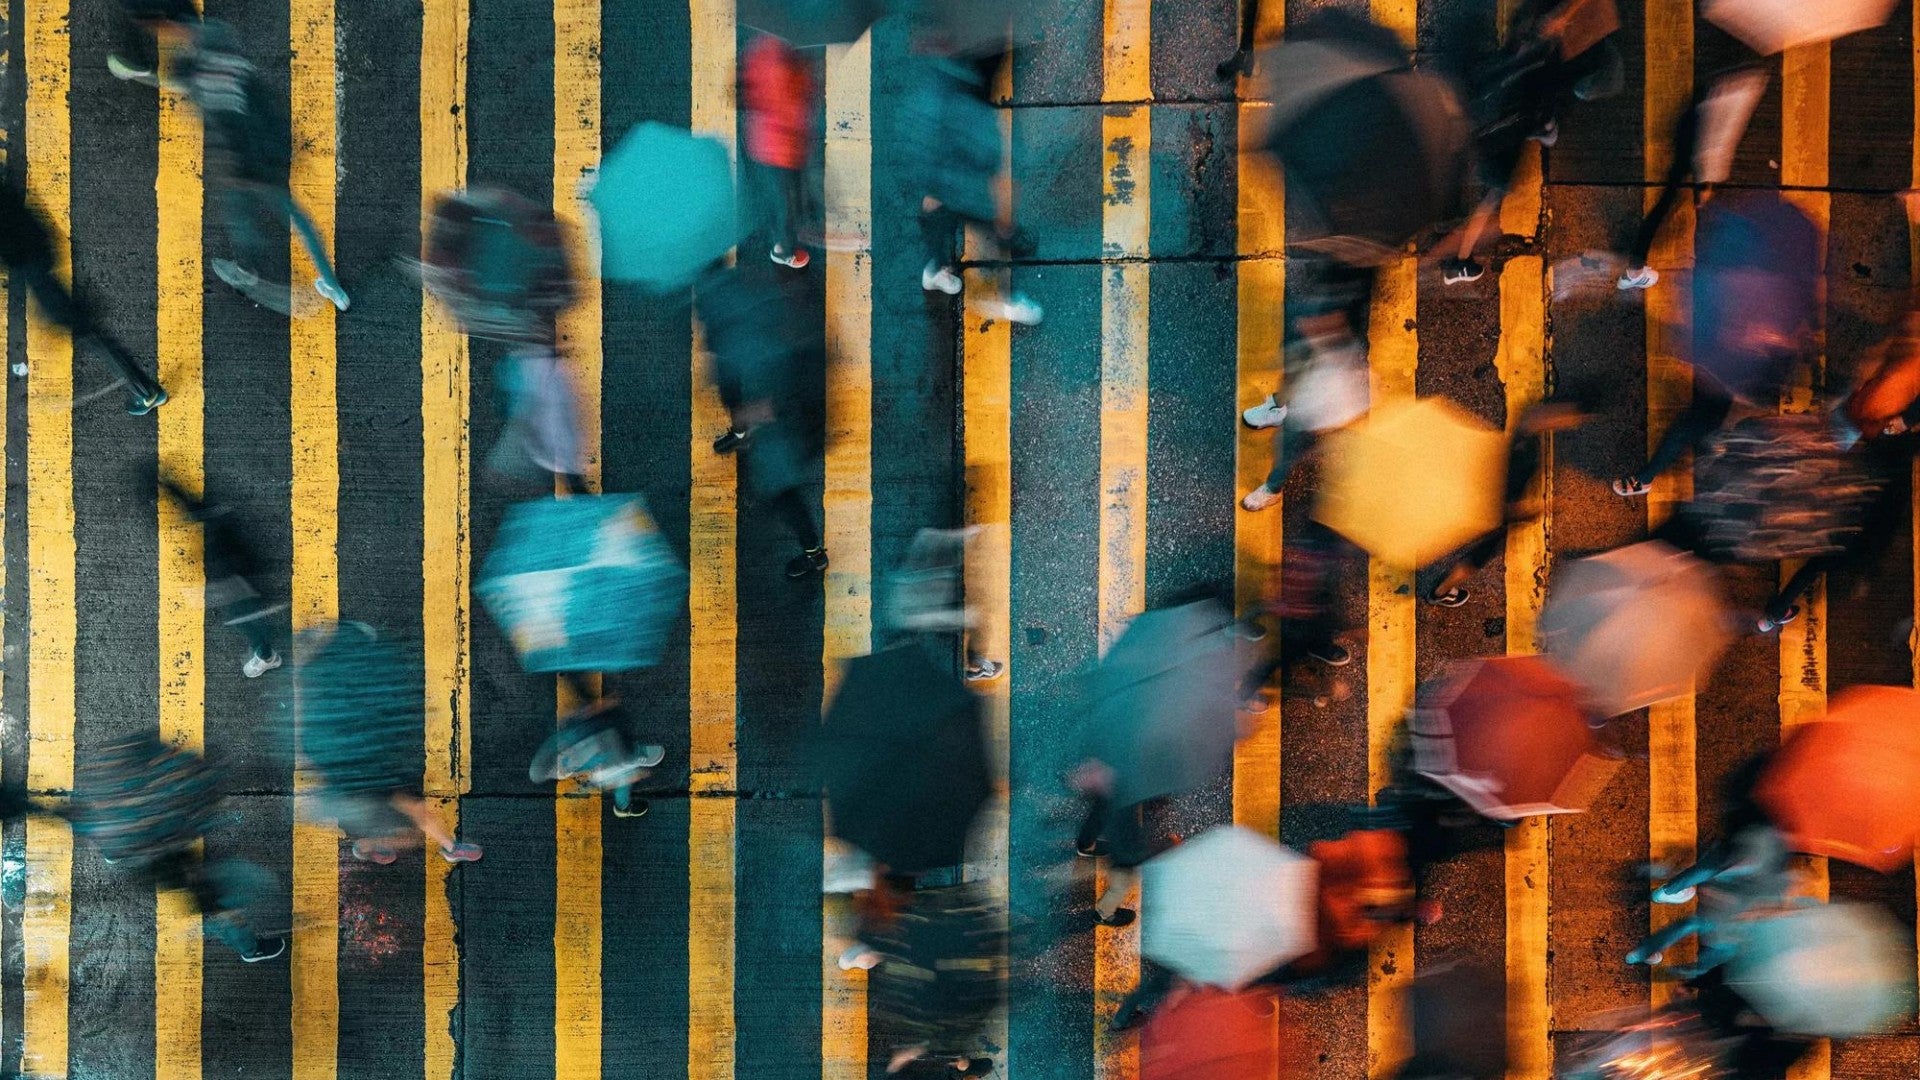 Overhead view of people with umbrellas navigating a city crosswalk